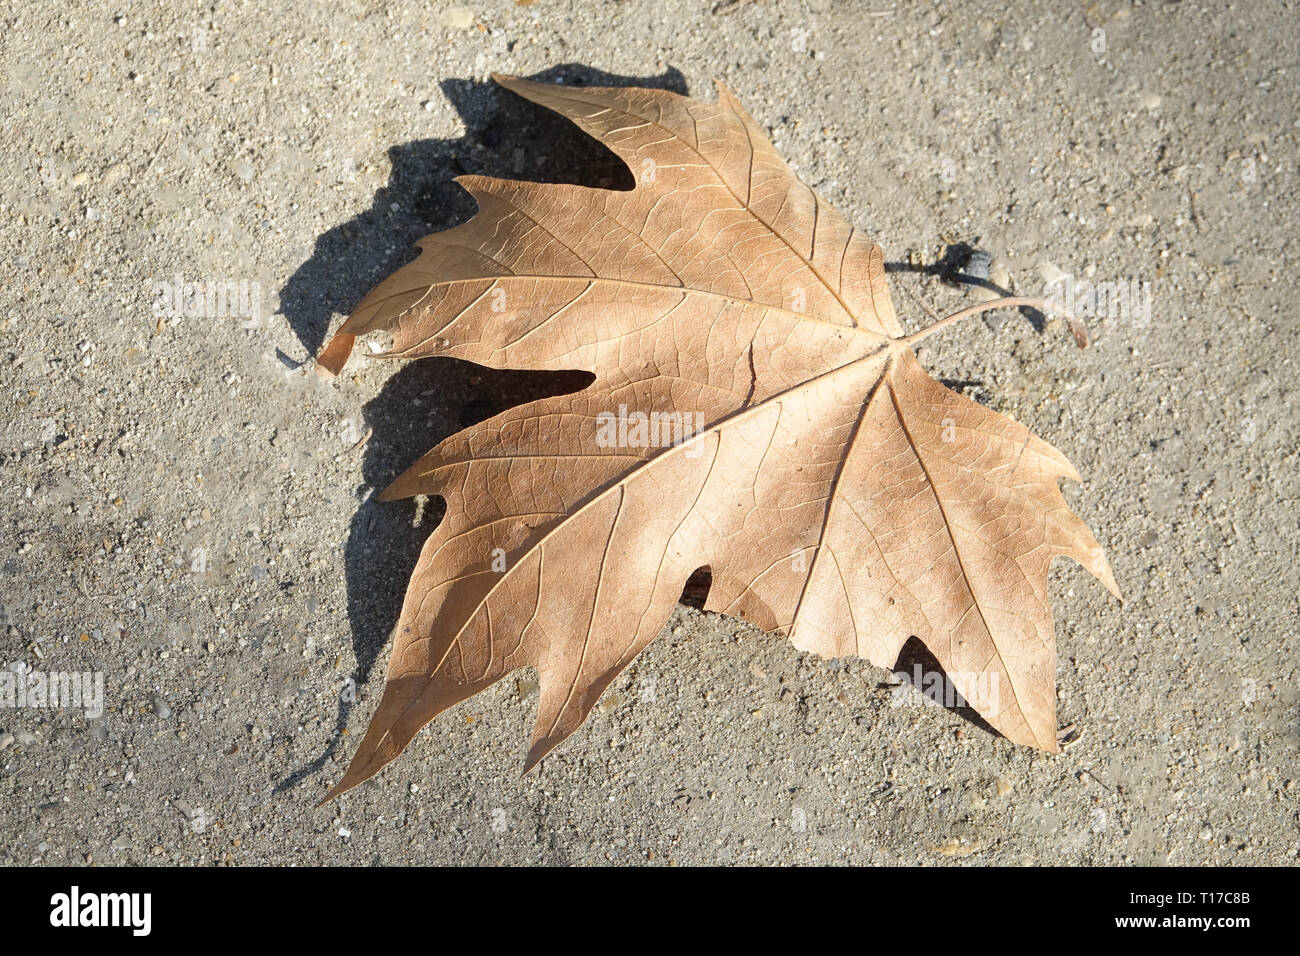 Close up of a dried out leaf on a sandy ground Stock Photo